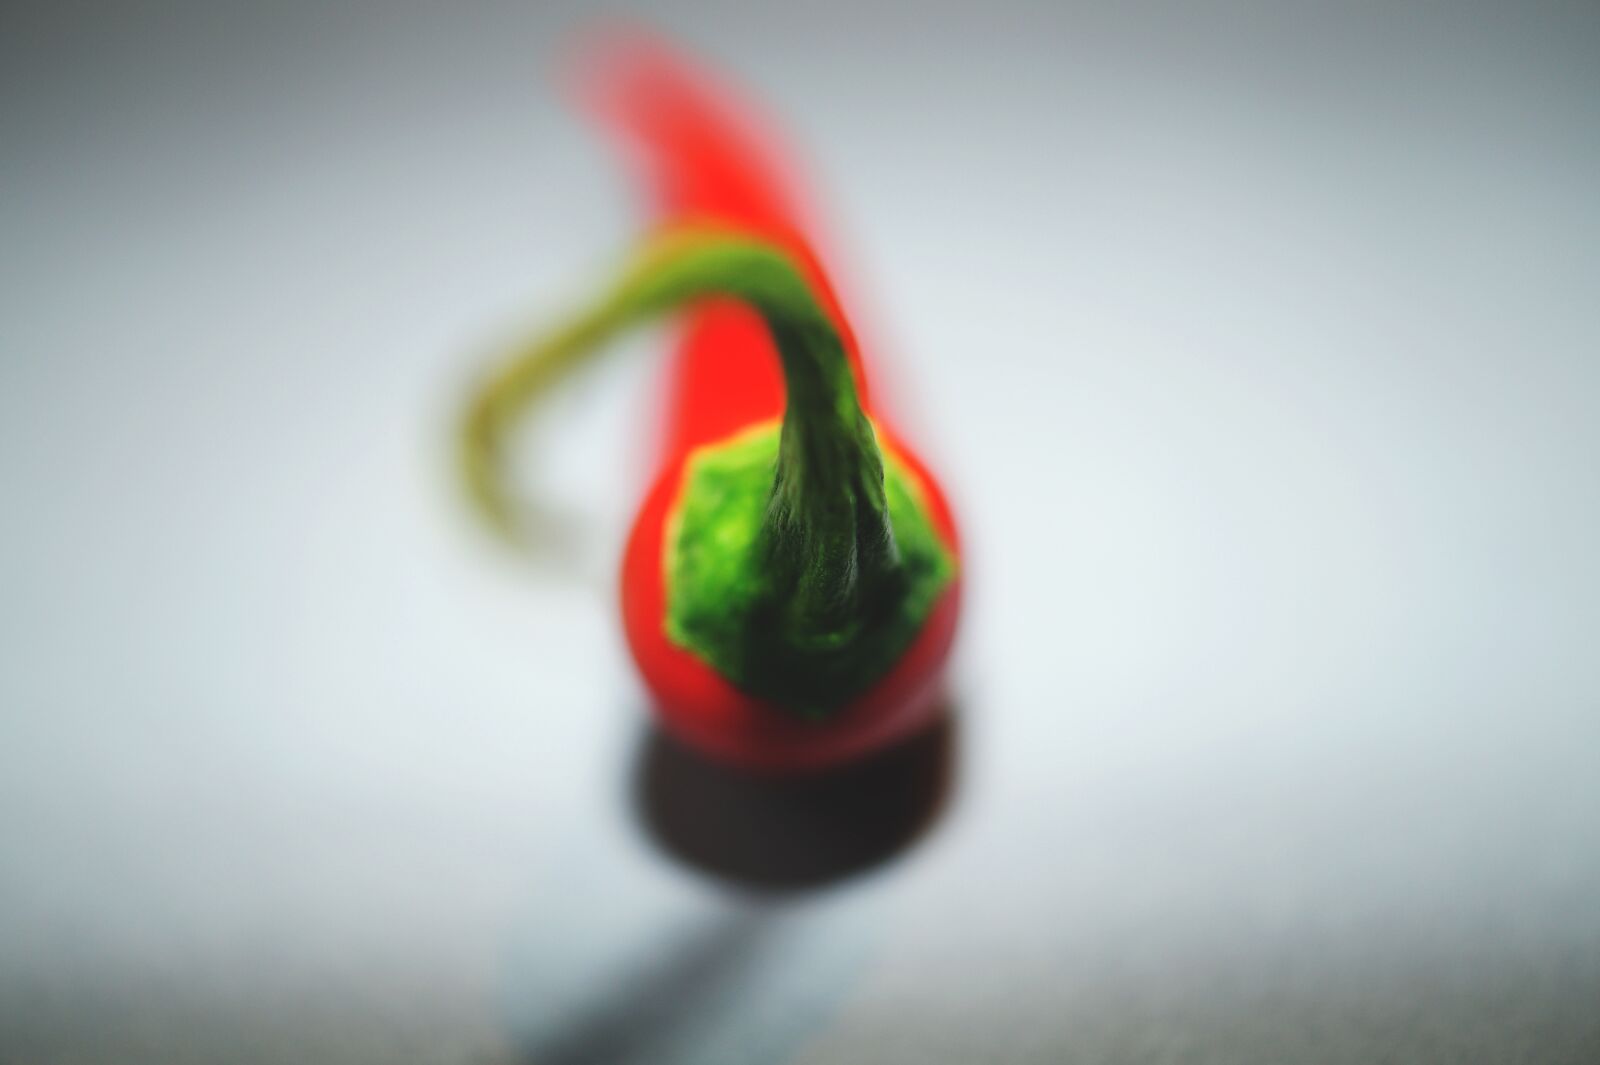 Sony DT 30mm F2.8 Macro SAM sample photo. Blur, chili, chilli, peppers photography